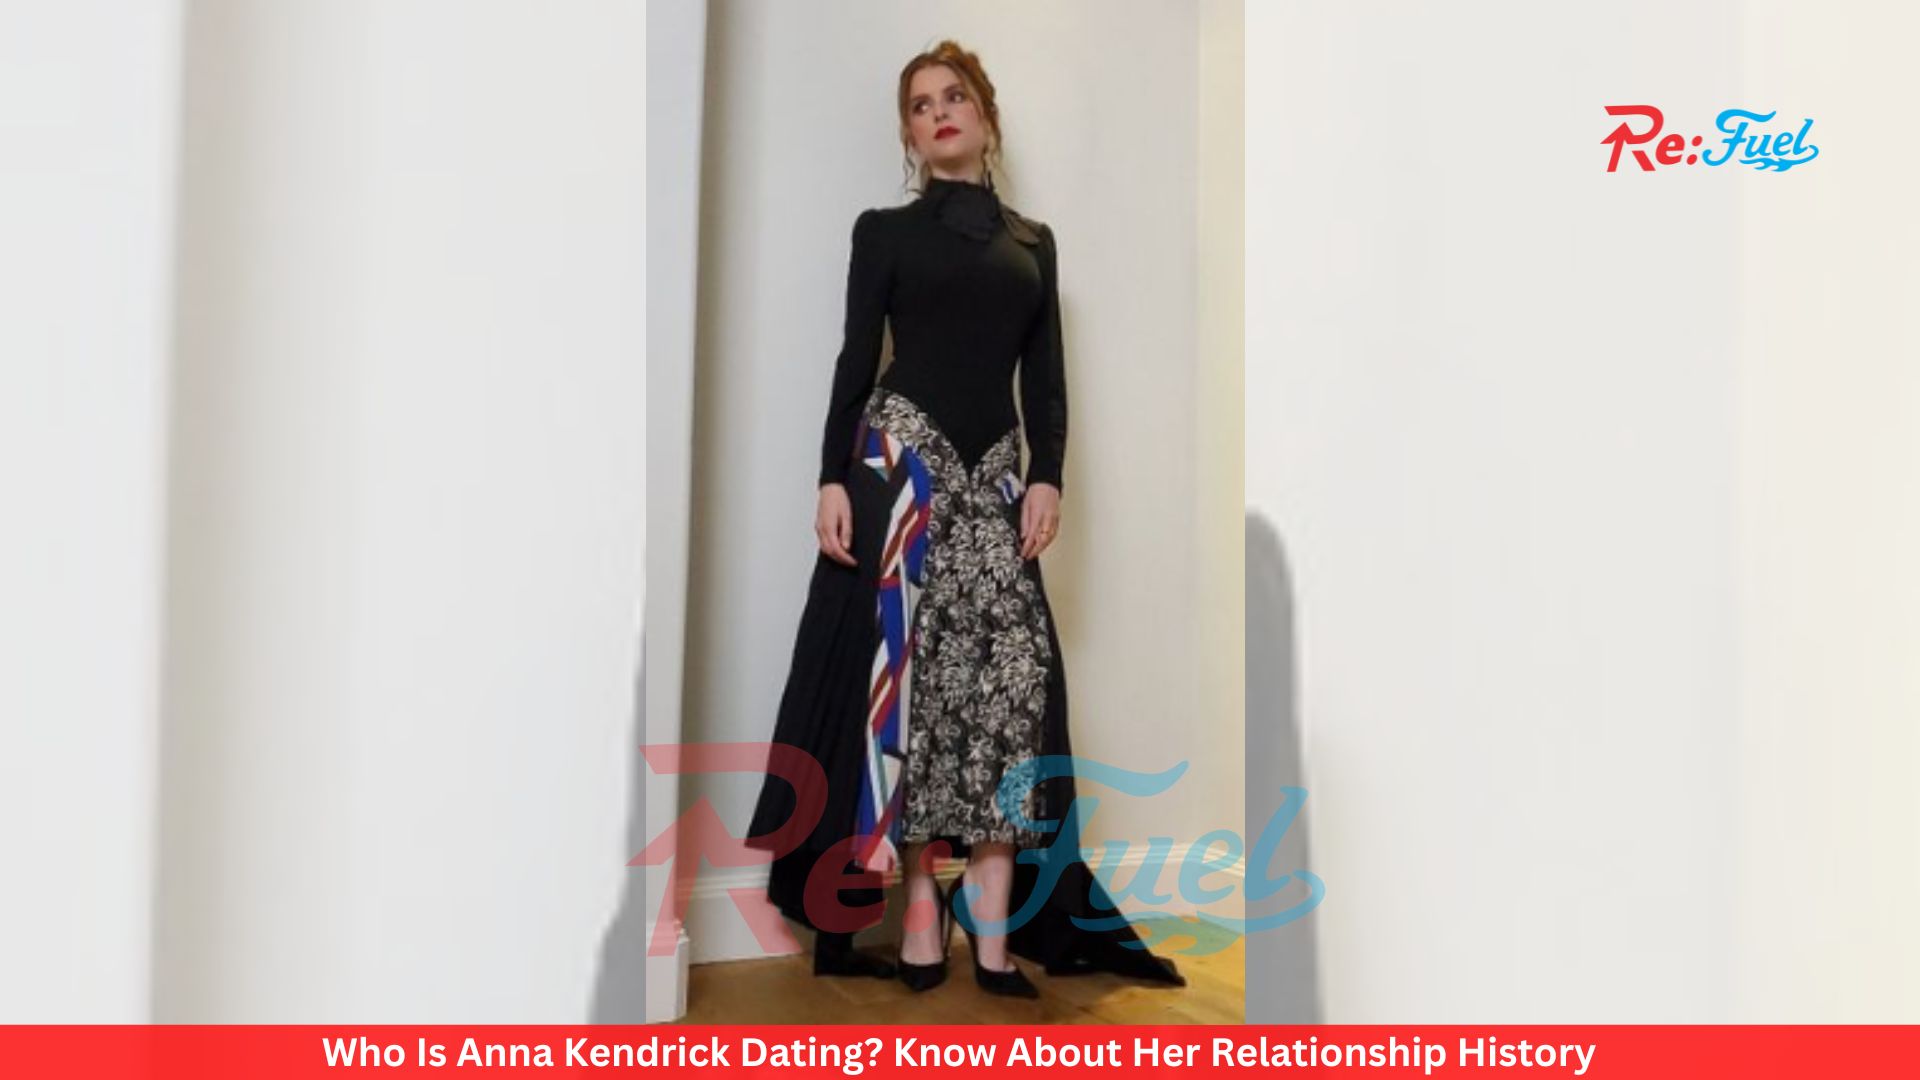 Who Is Anna Kendrick Dating? Know About Her Relationship History